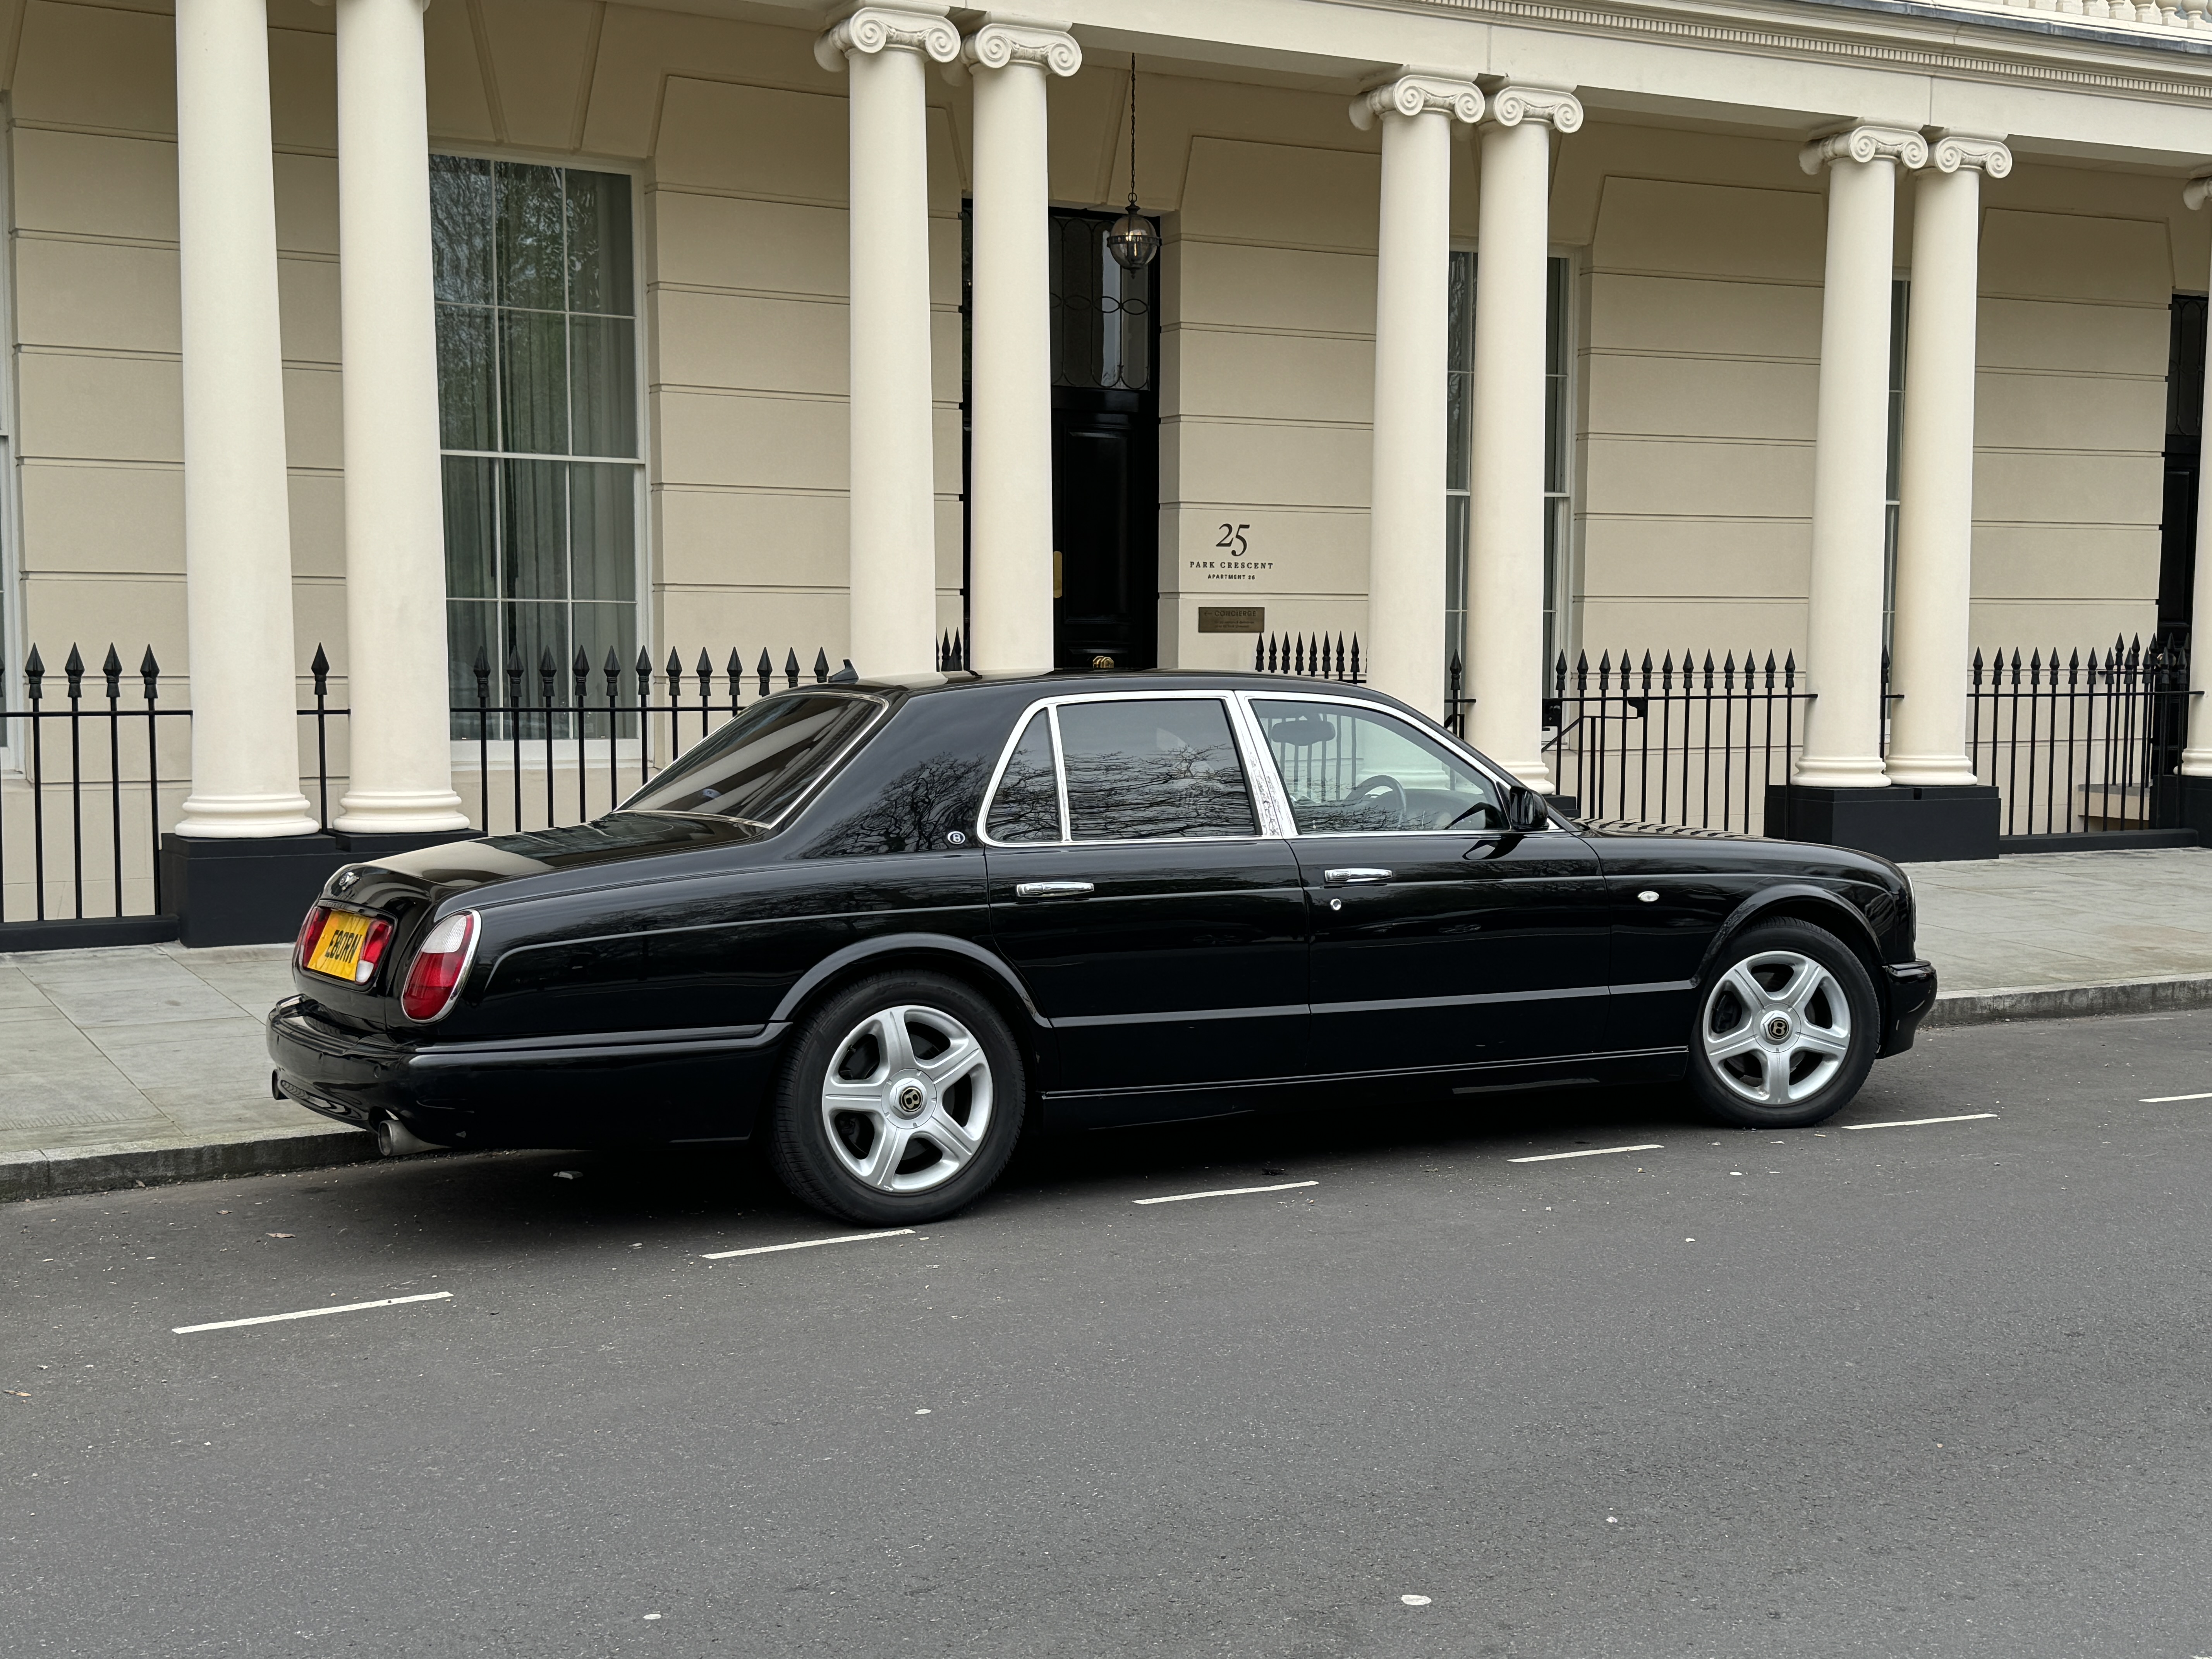 Bentley Arnage R, 6750cc V8 Twin Turbo, Black coachwork with matching black leather upholstery and - Image 70 of 78